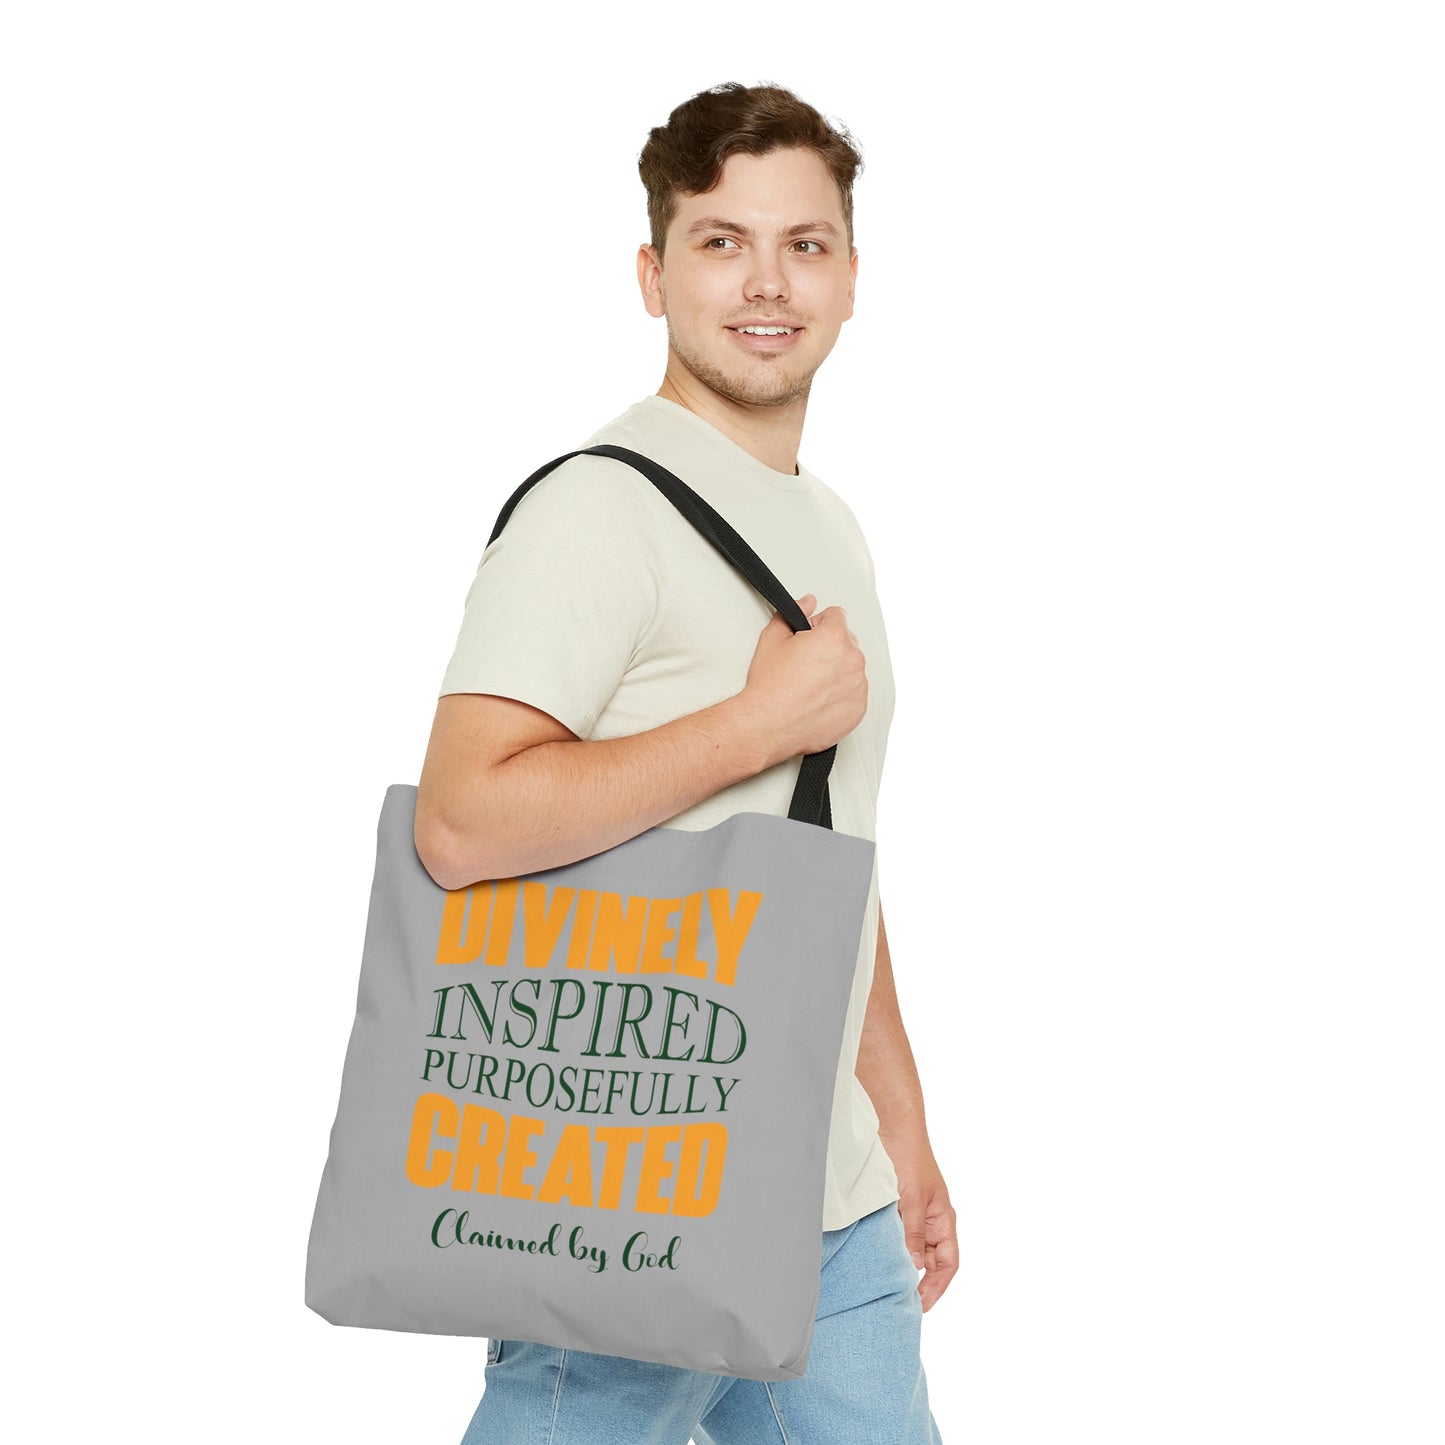 Divinely Inspired Purposefully Created Tote Bag